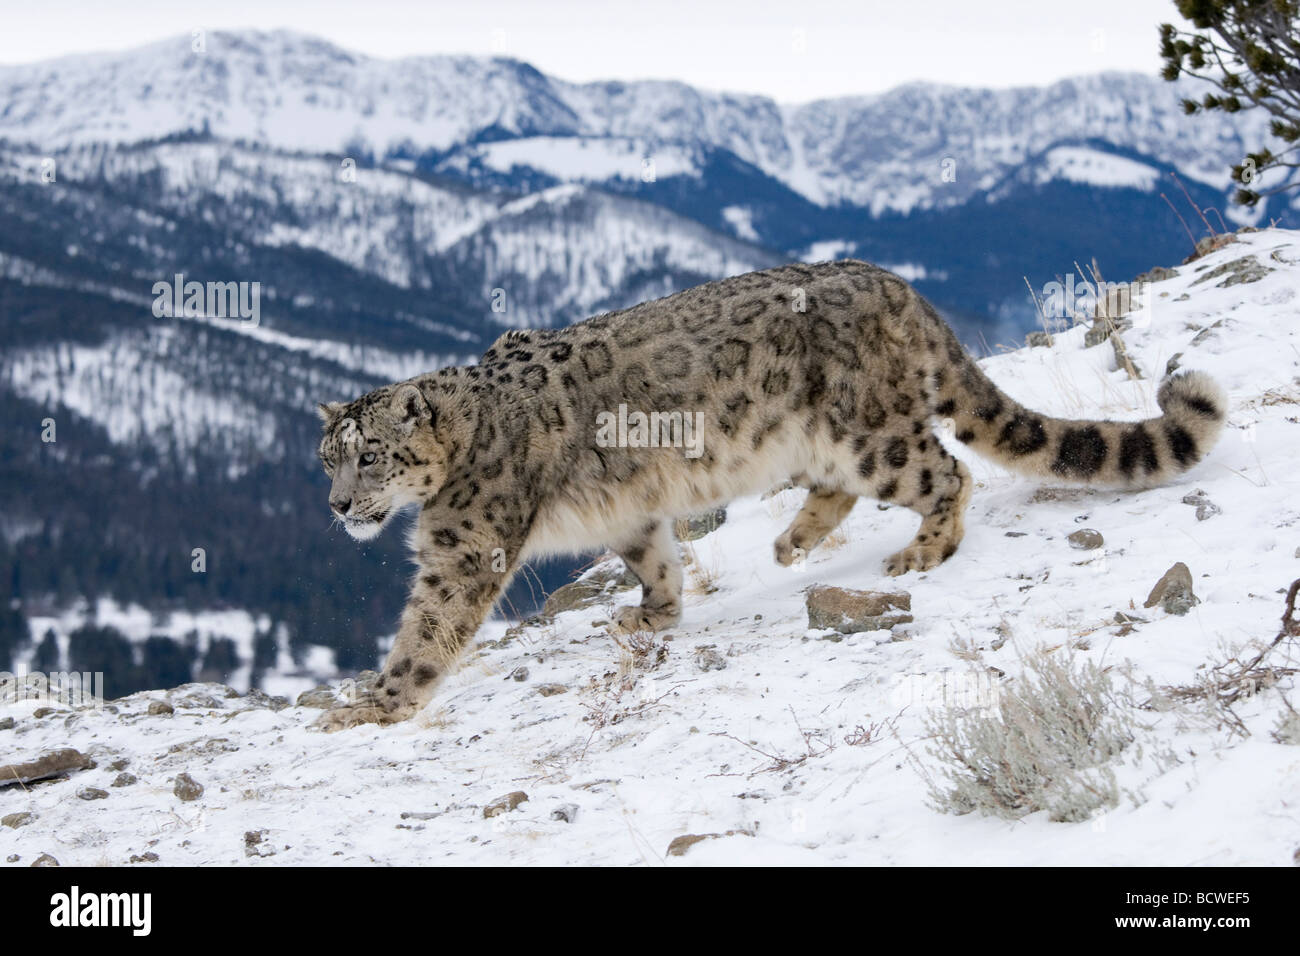 Snow Leopard (Panthera uncia) walking in snow Banque D'Images